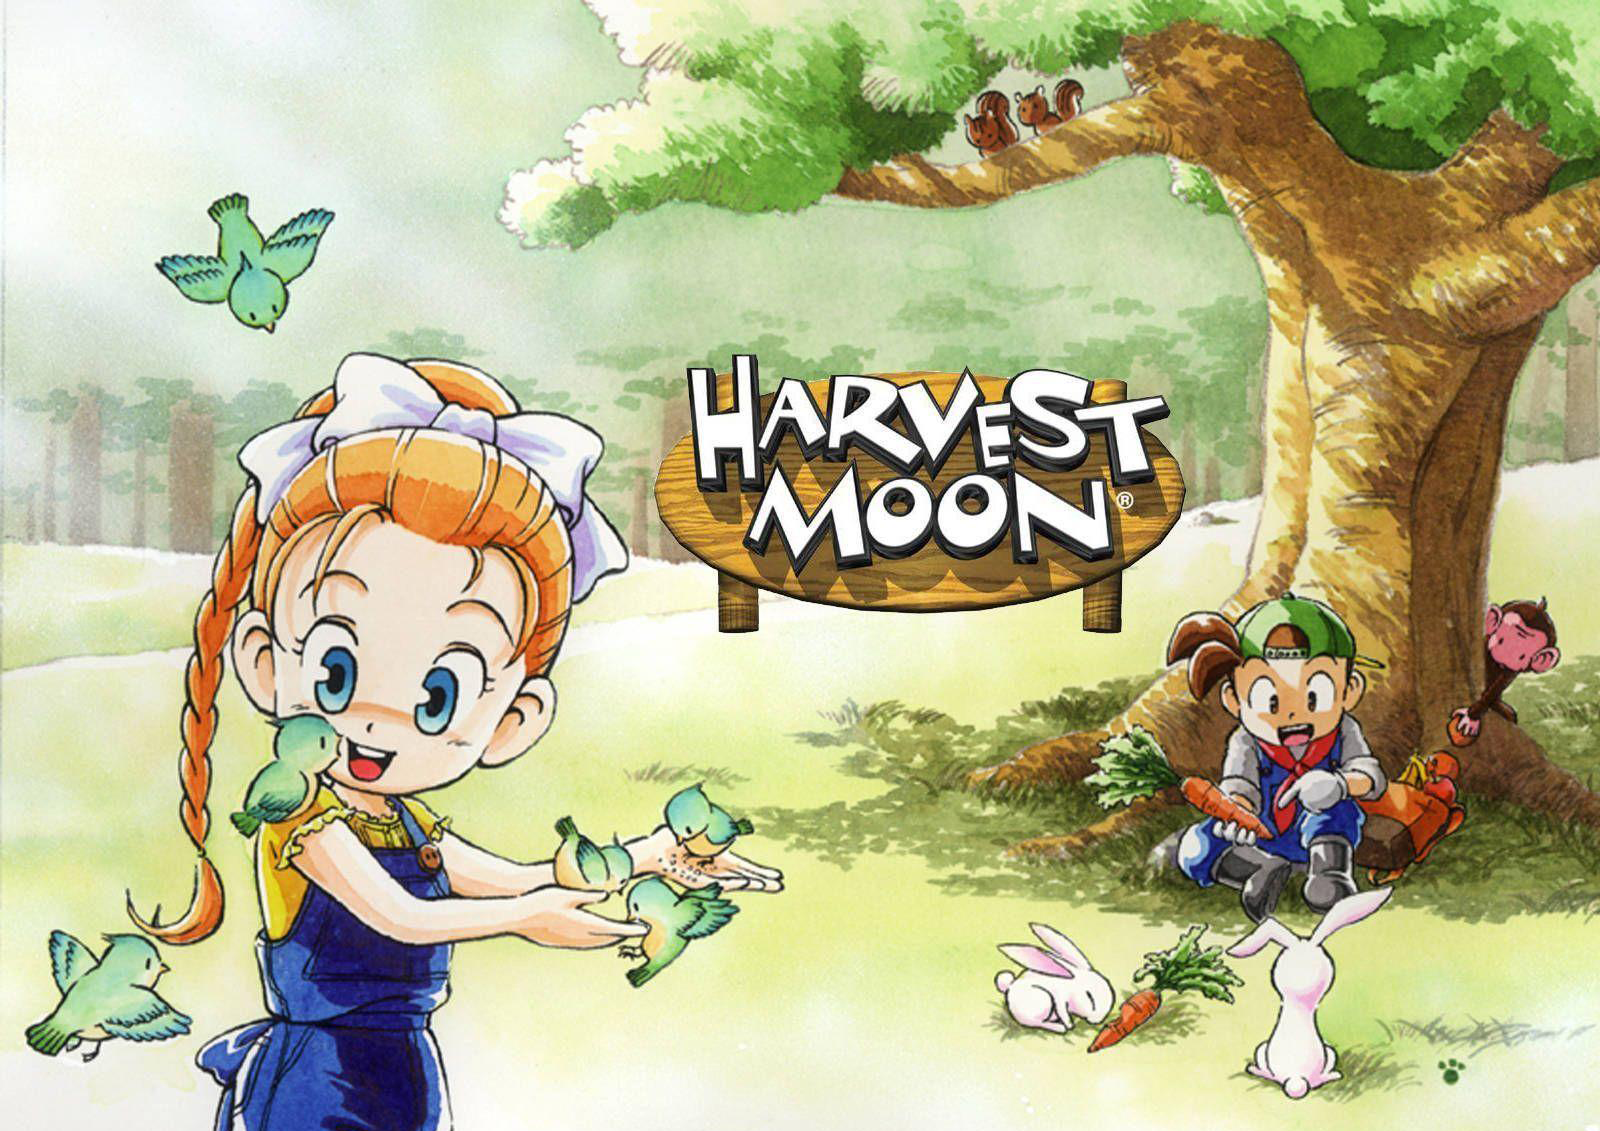 ds harvest moon game